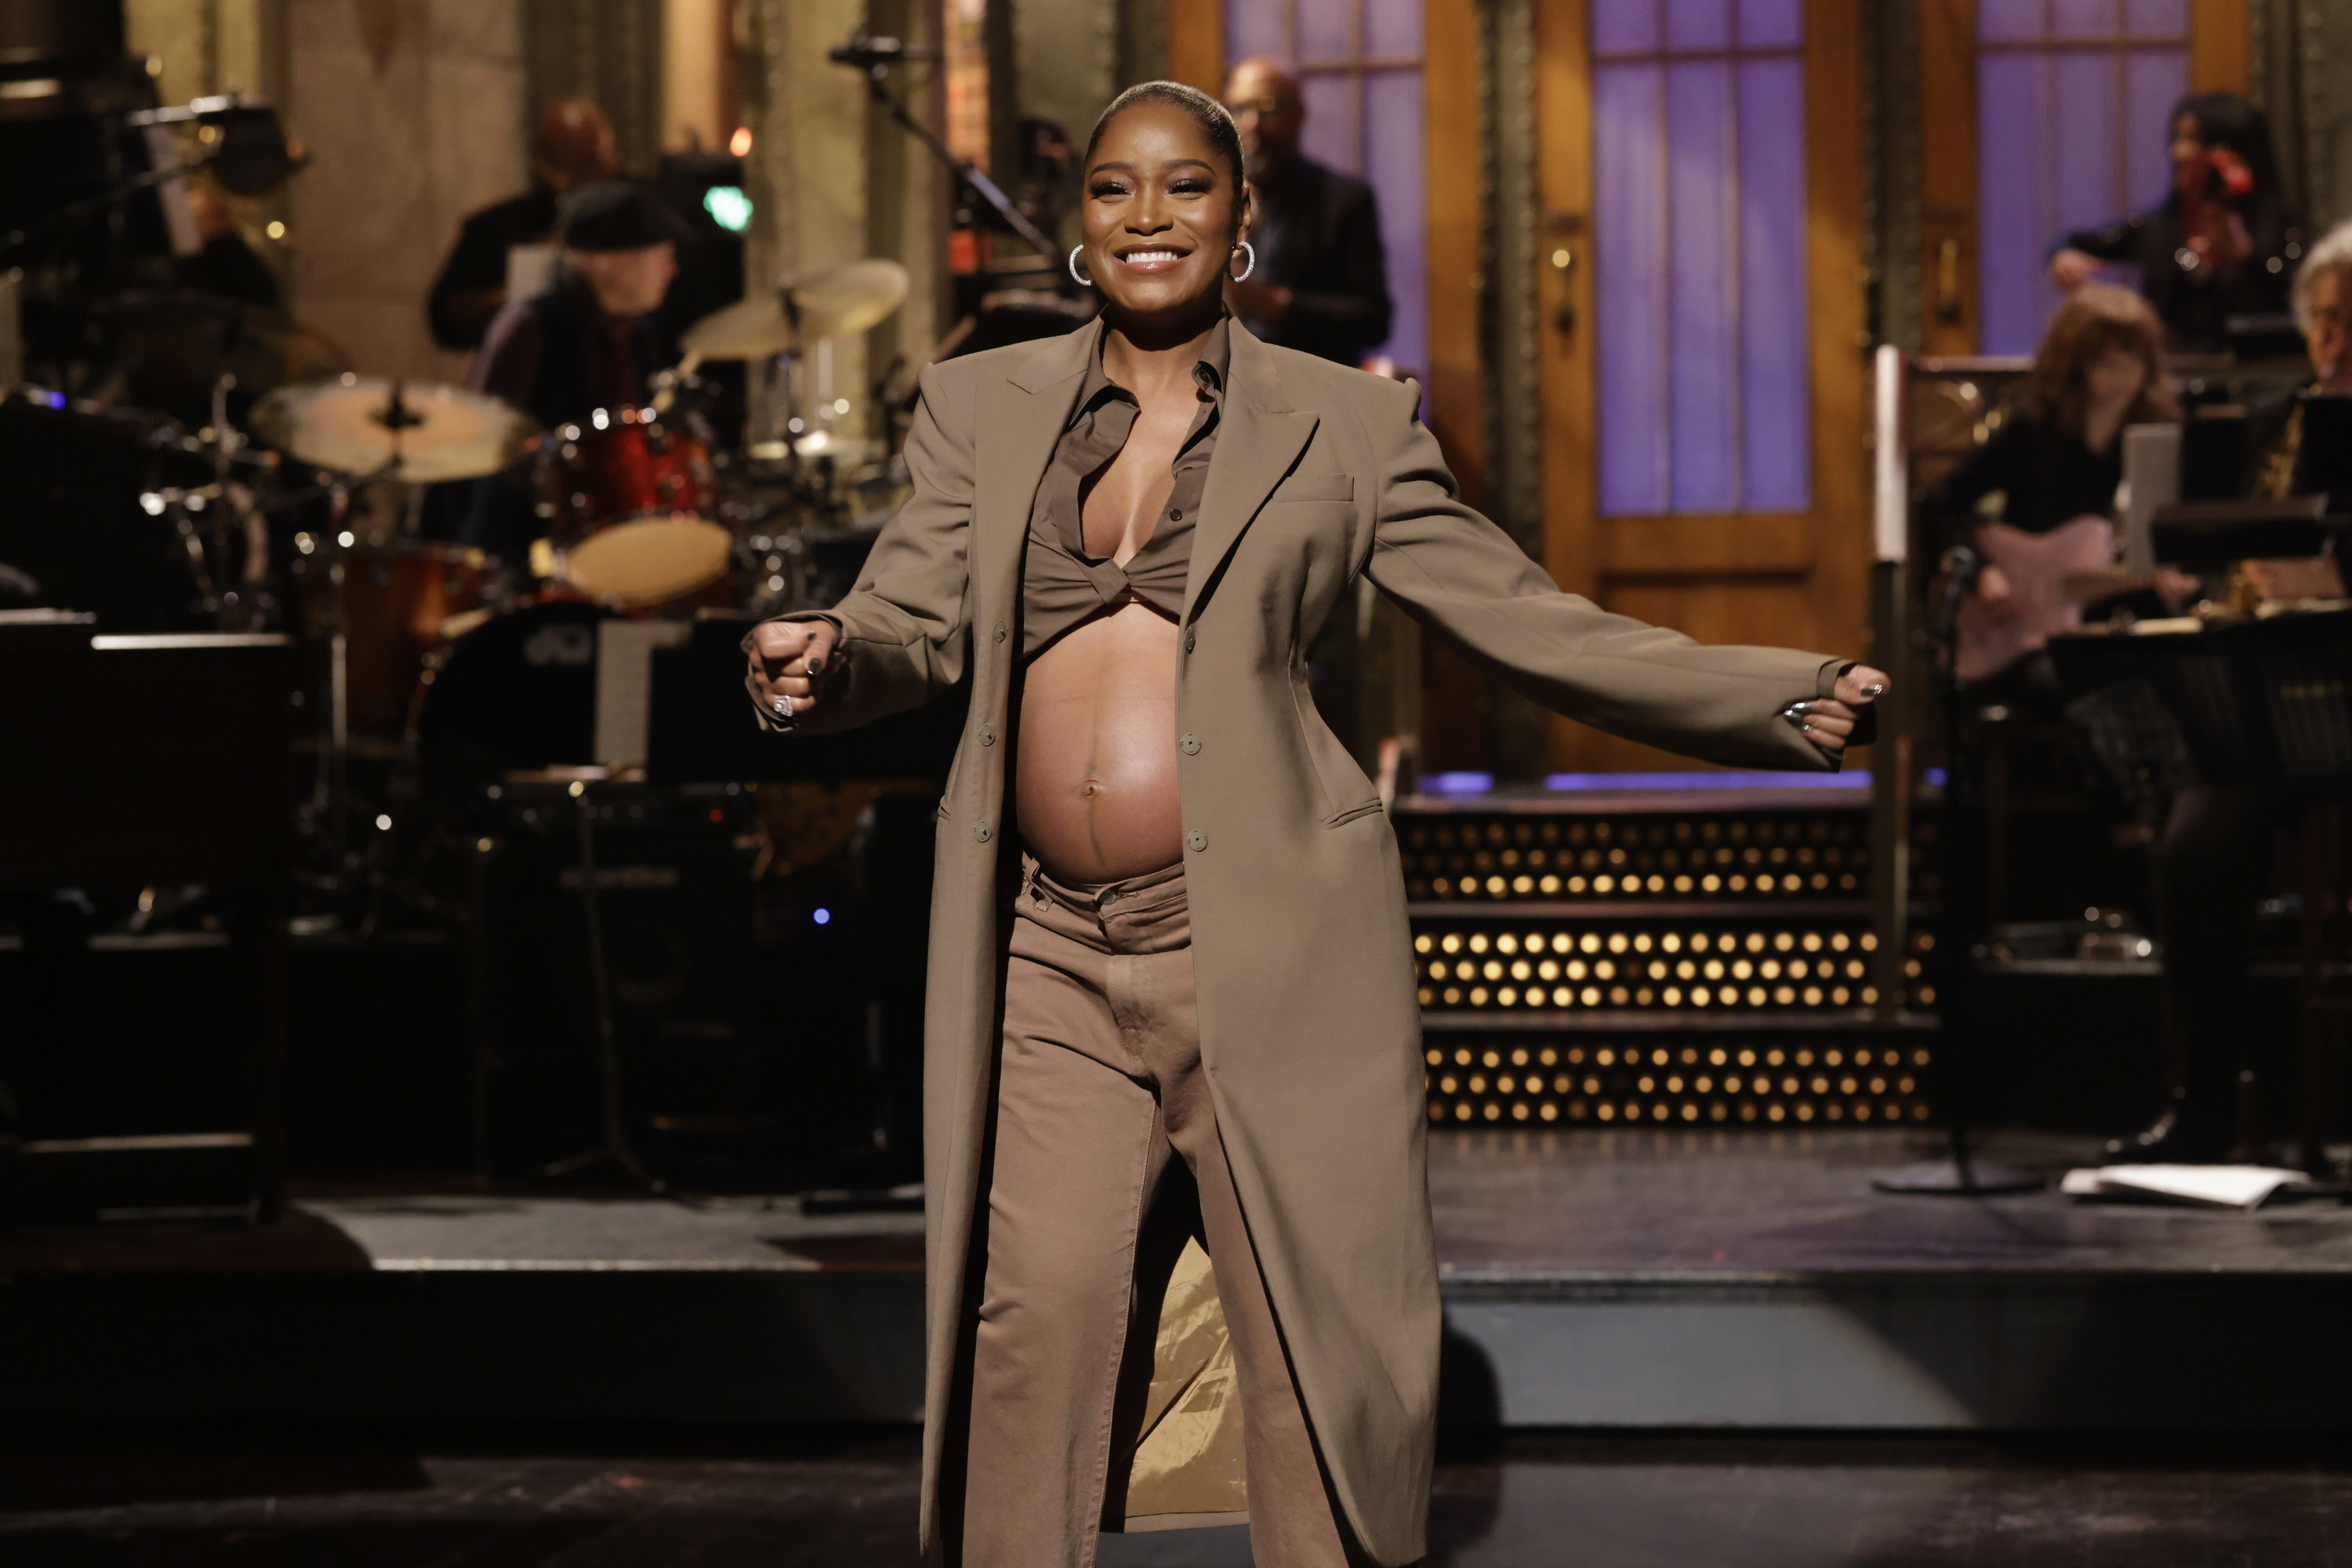 keke wearing a crop top to show her belly on stage